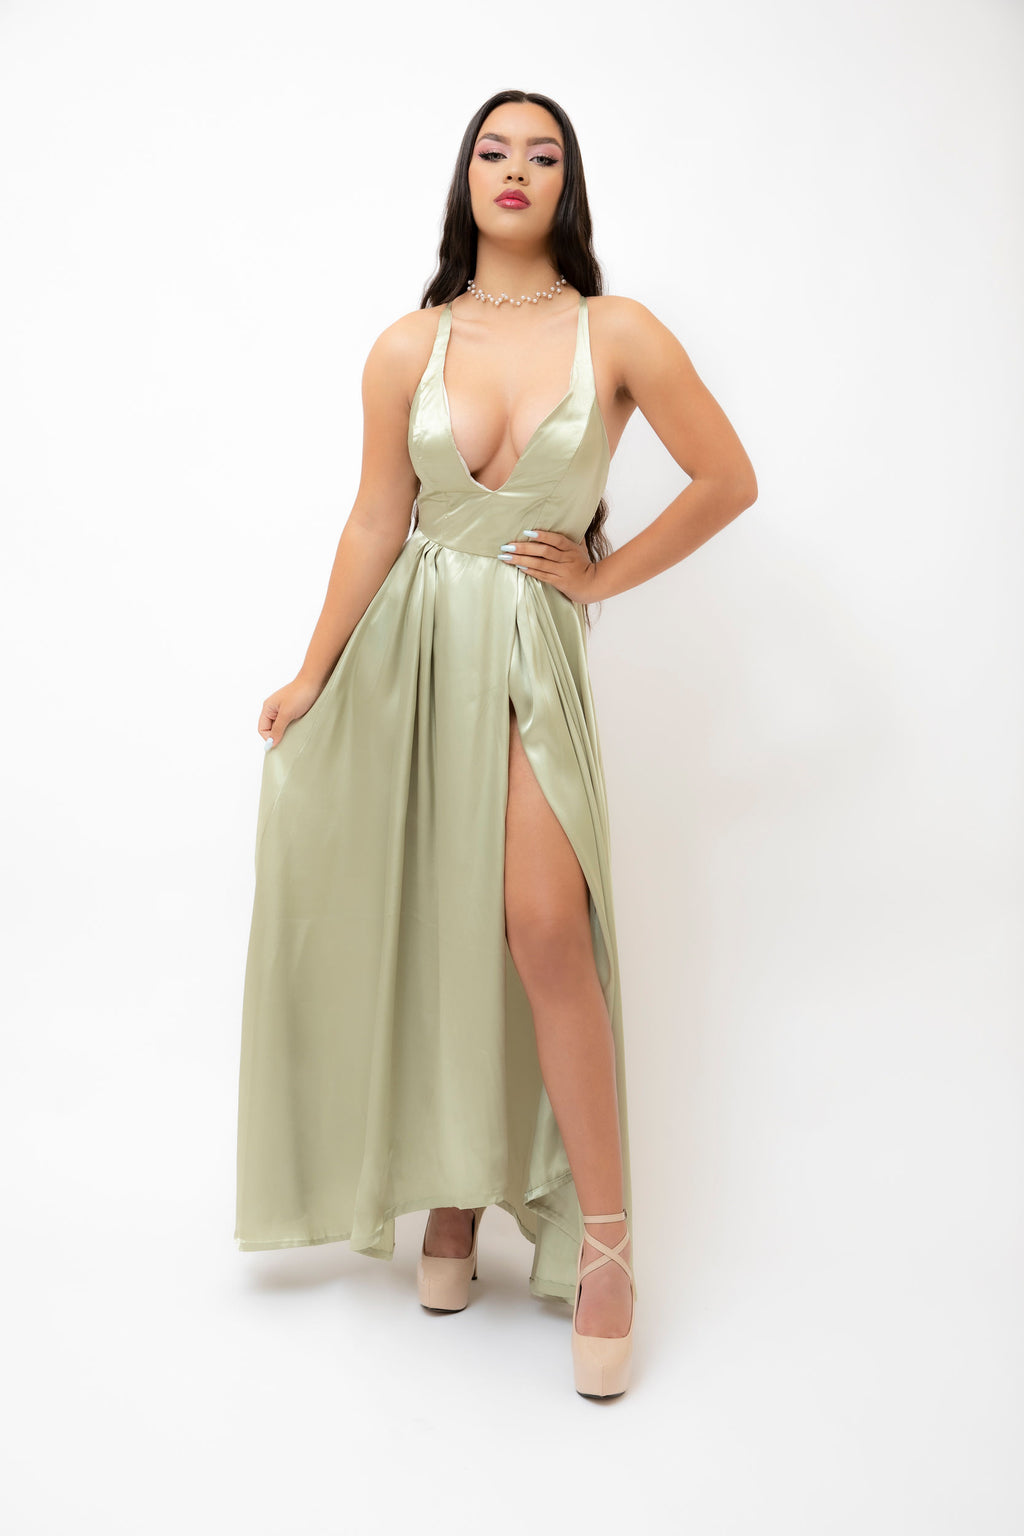 Green plunging gown.